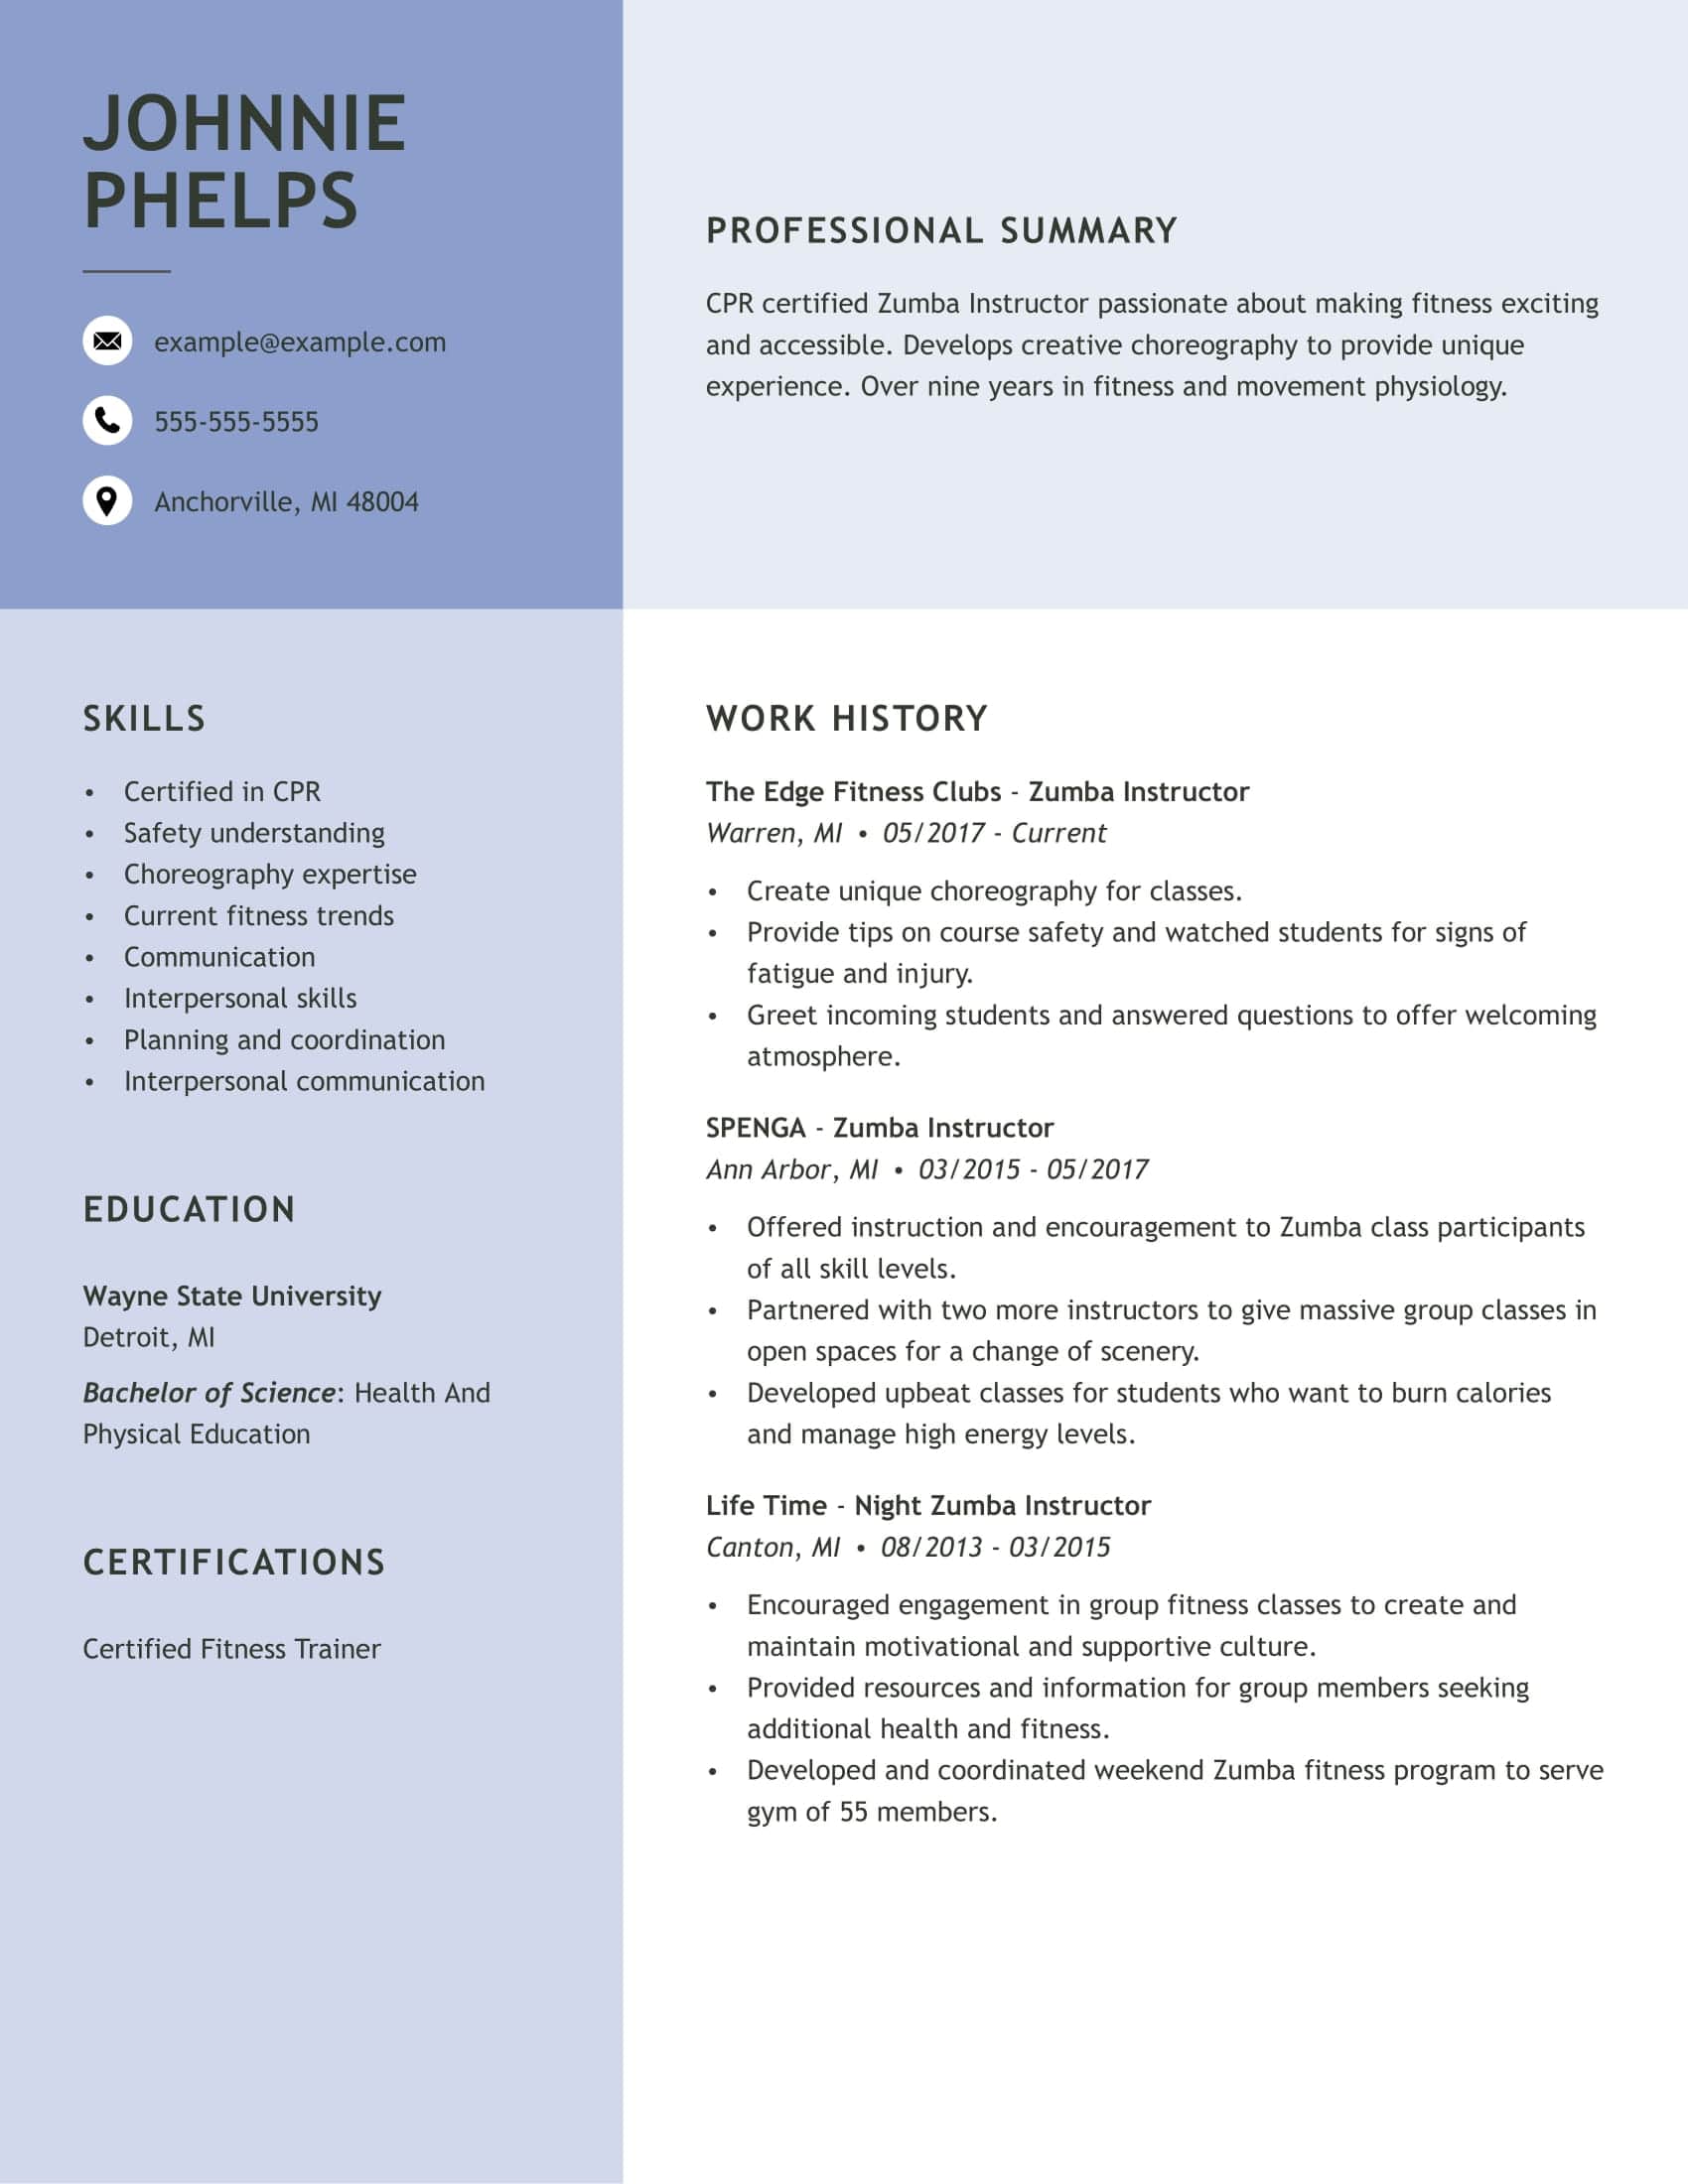 Zumba Instructor | Free Resume Templates + How-To Guide